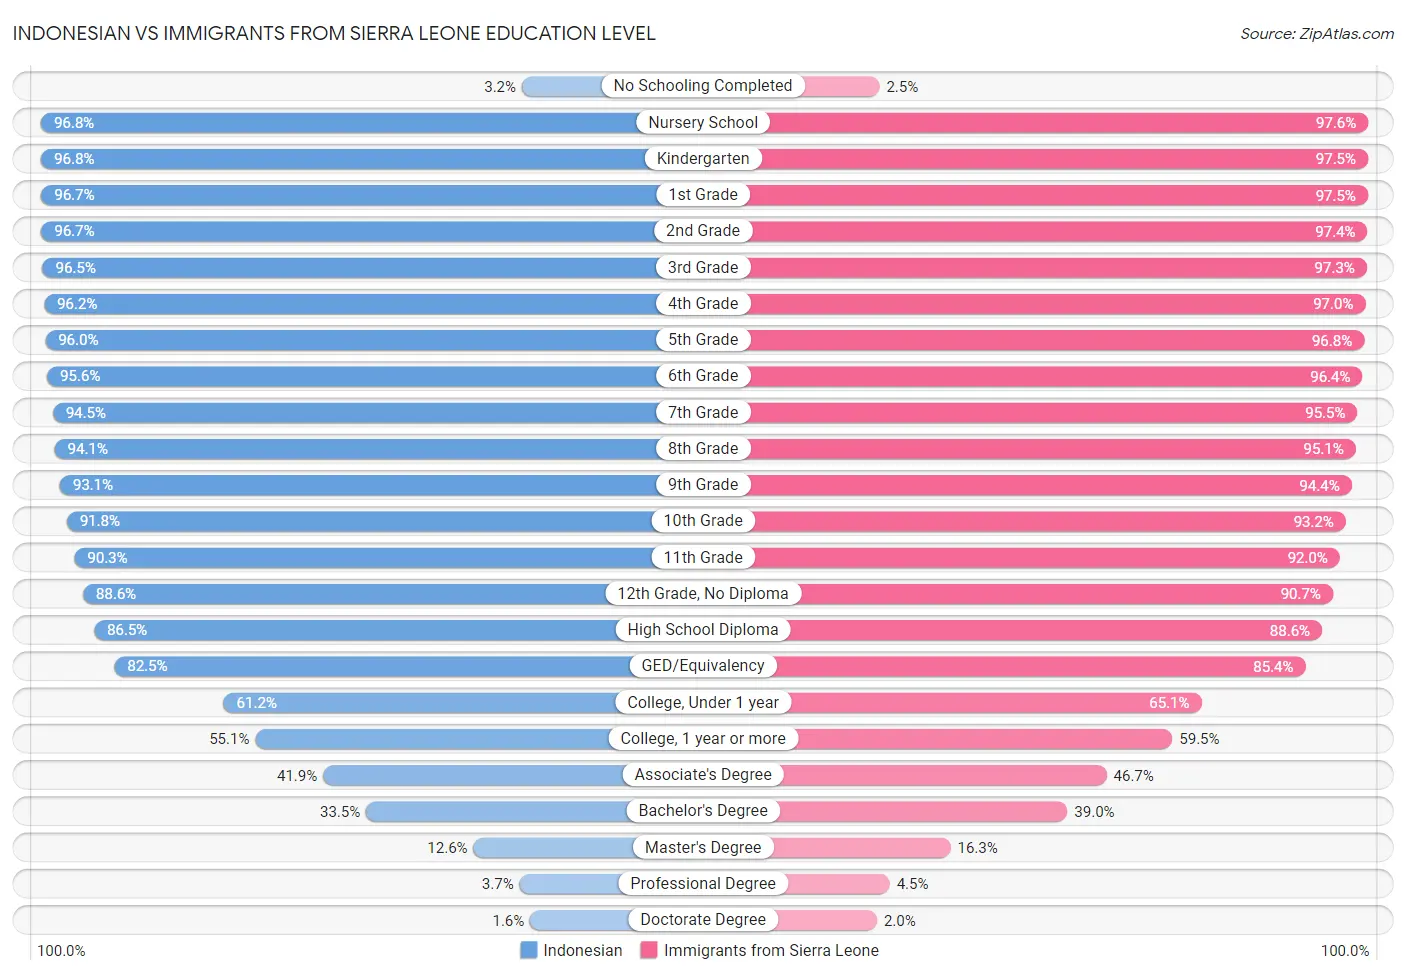 Indonesian vs Immigrants from Sierra Leone Education Level